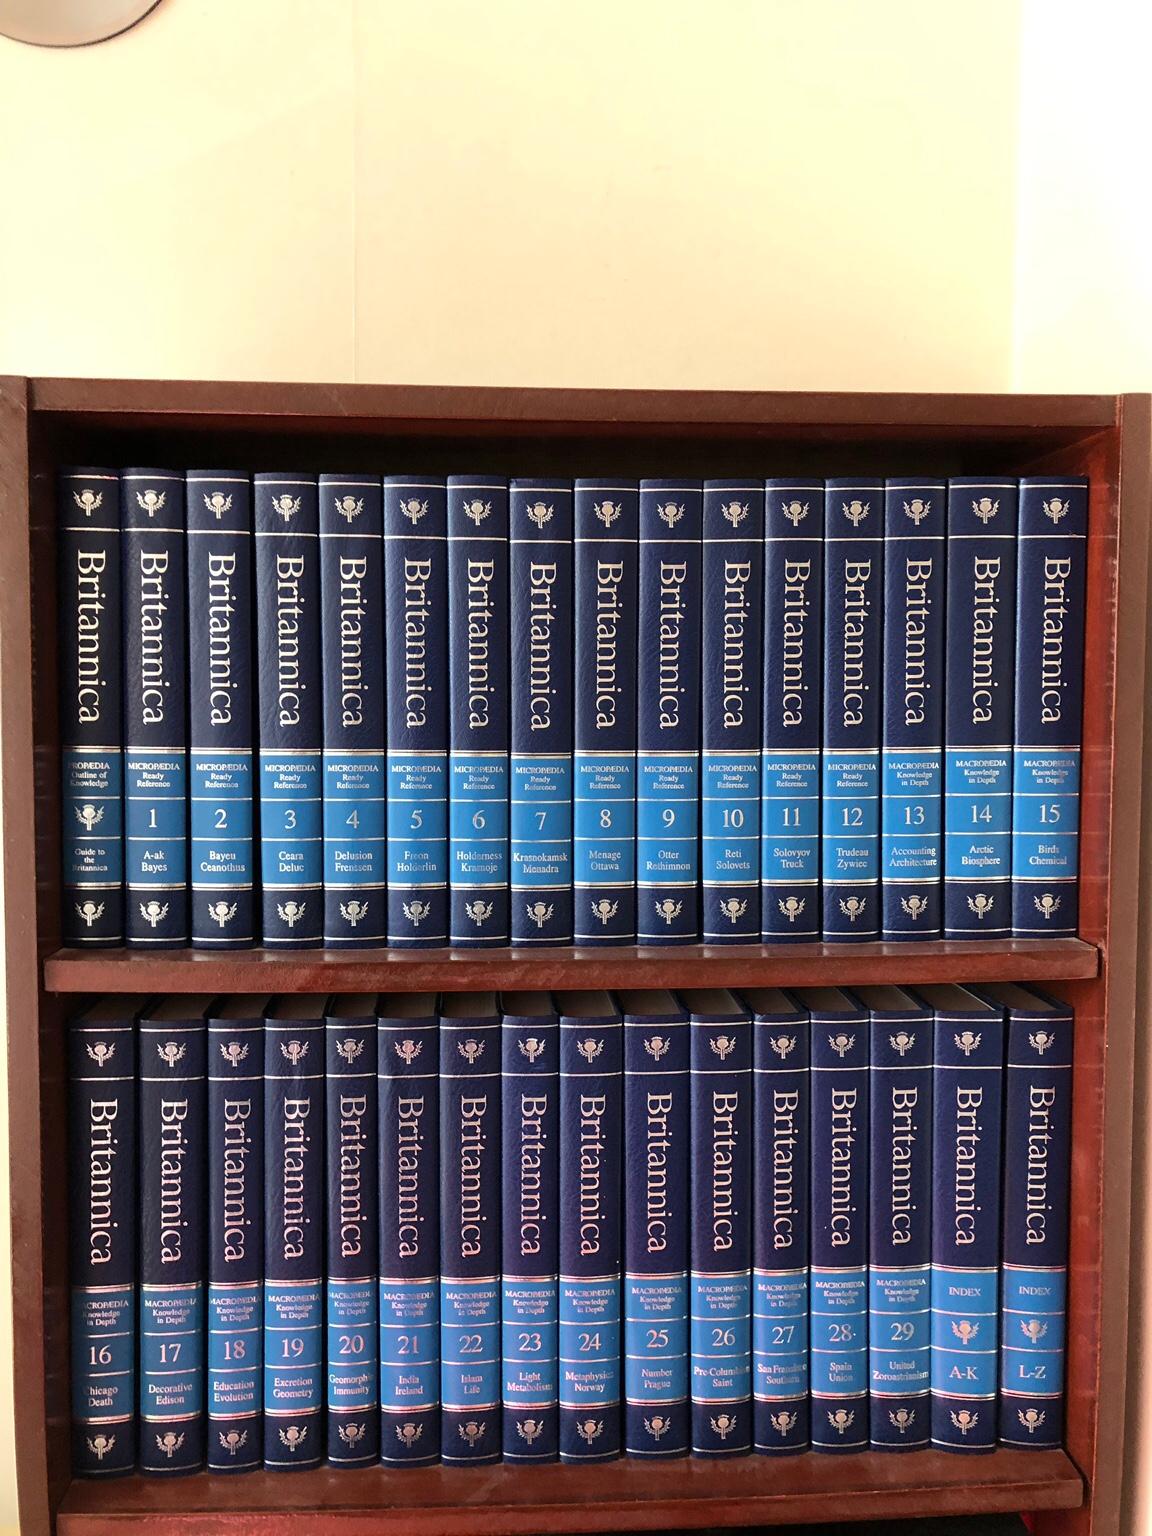 Britannica Encyclopedia Complete Set in London for £150.00 for sale